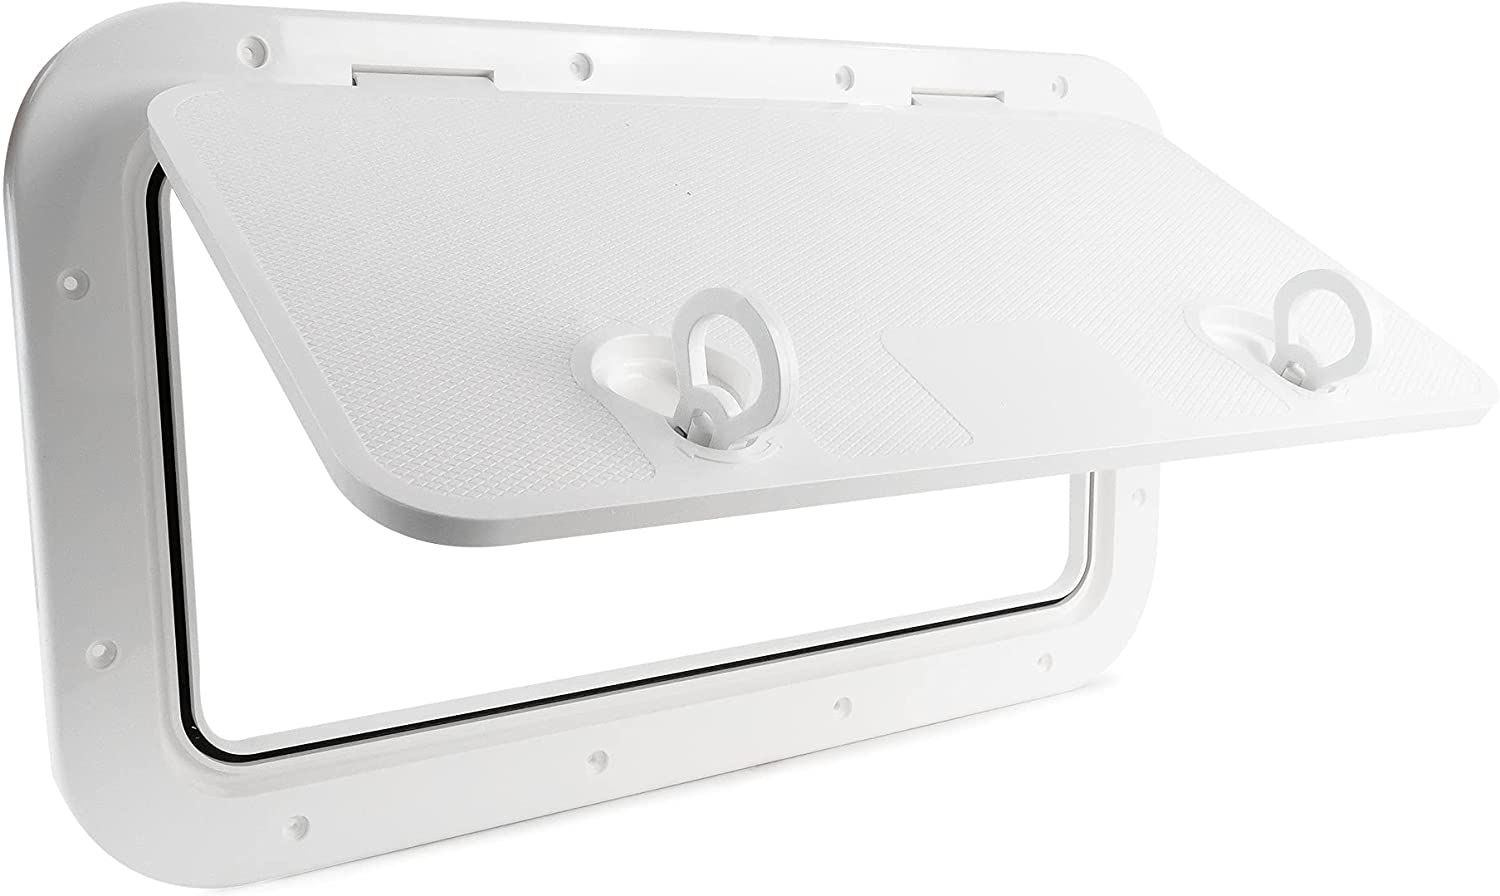 Marine Deck Access Hatch with Locking Slam Latch Handle, Off-White UV-Stabilized Polypropylene, 23-1/2 inches (596mm) x 13-5/8 inches (348mm)-Canadian Marine &amp; Outdoor Equipment